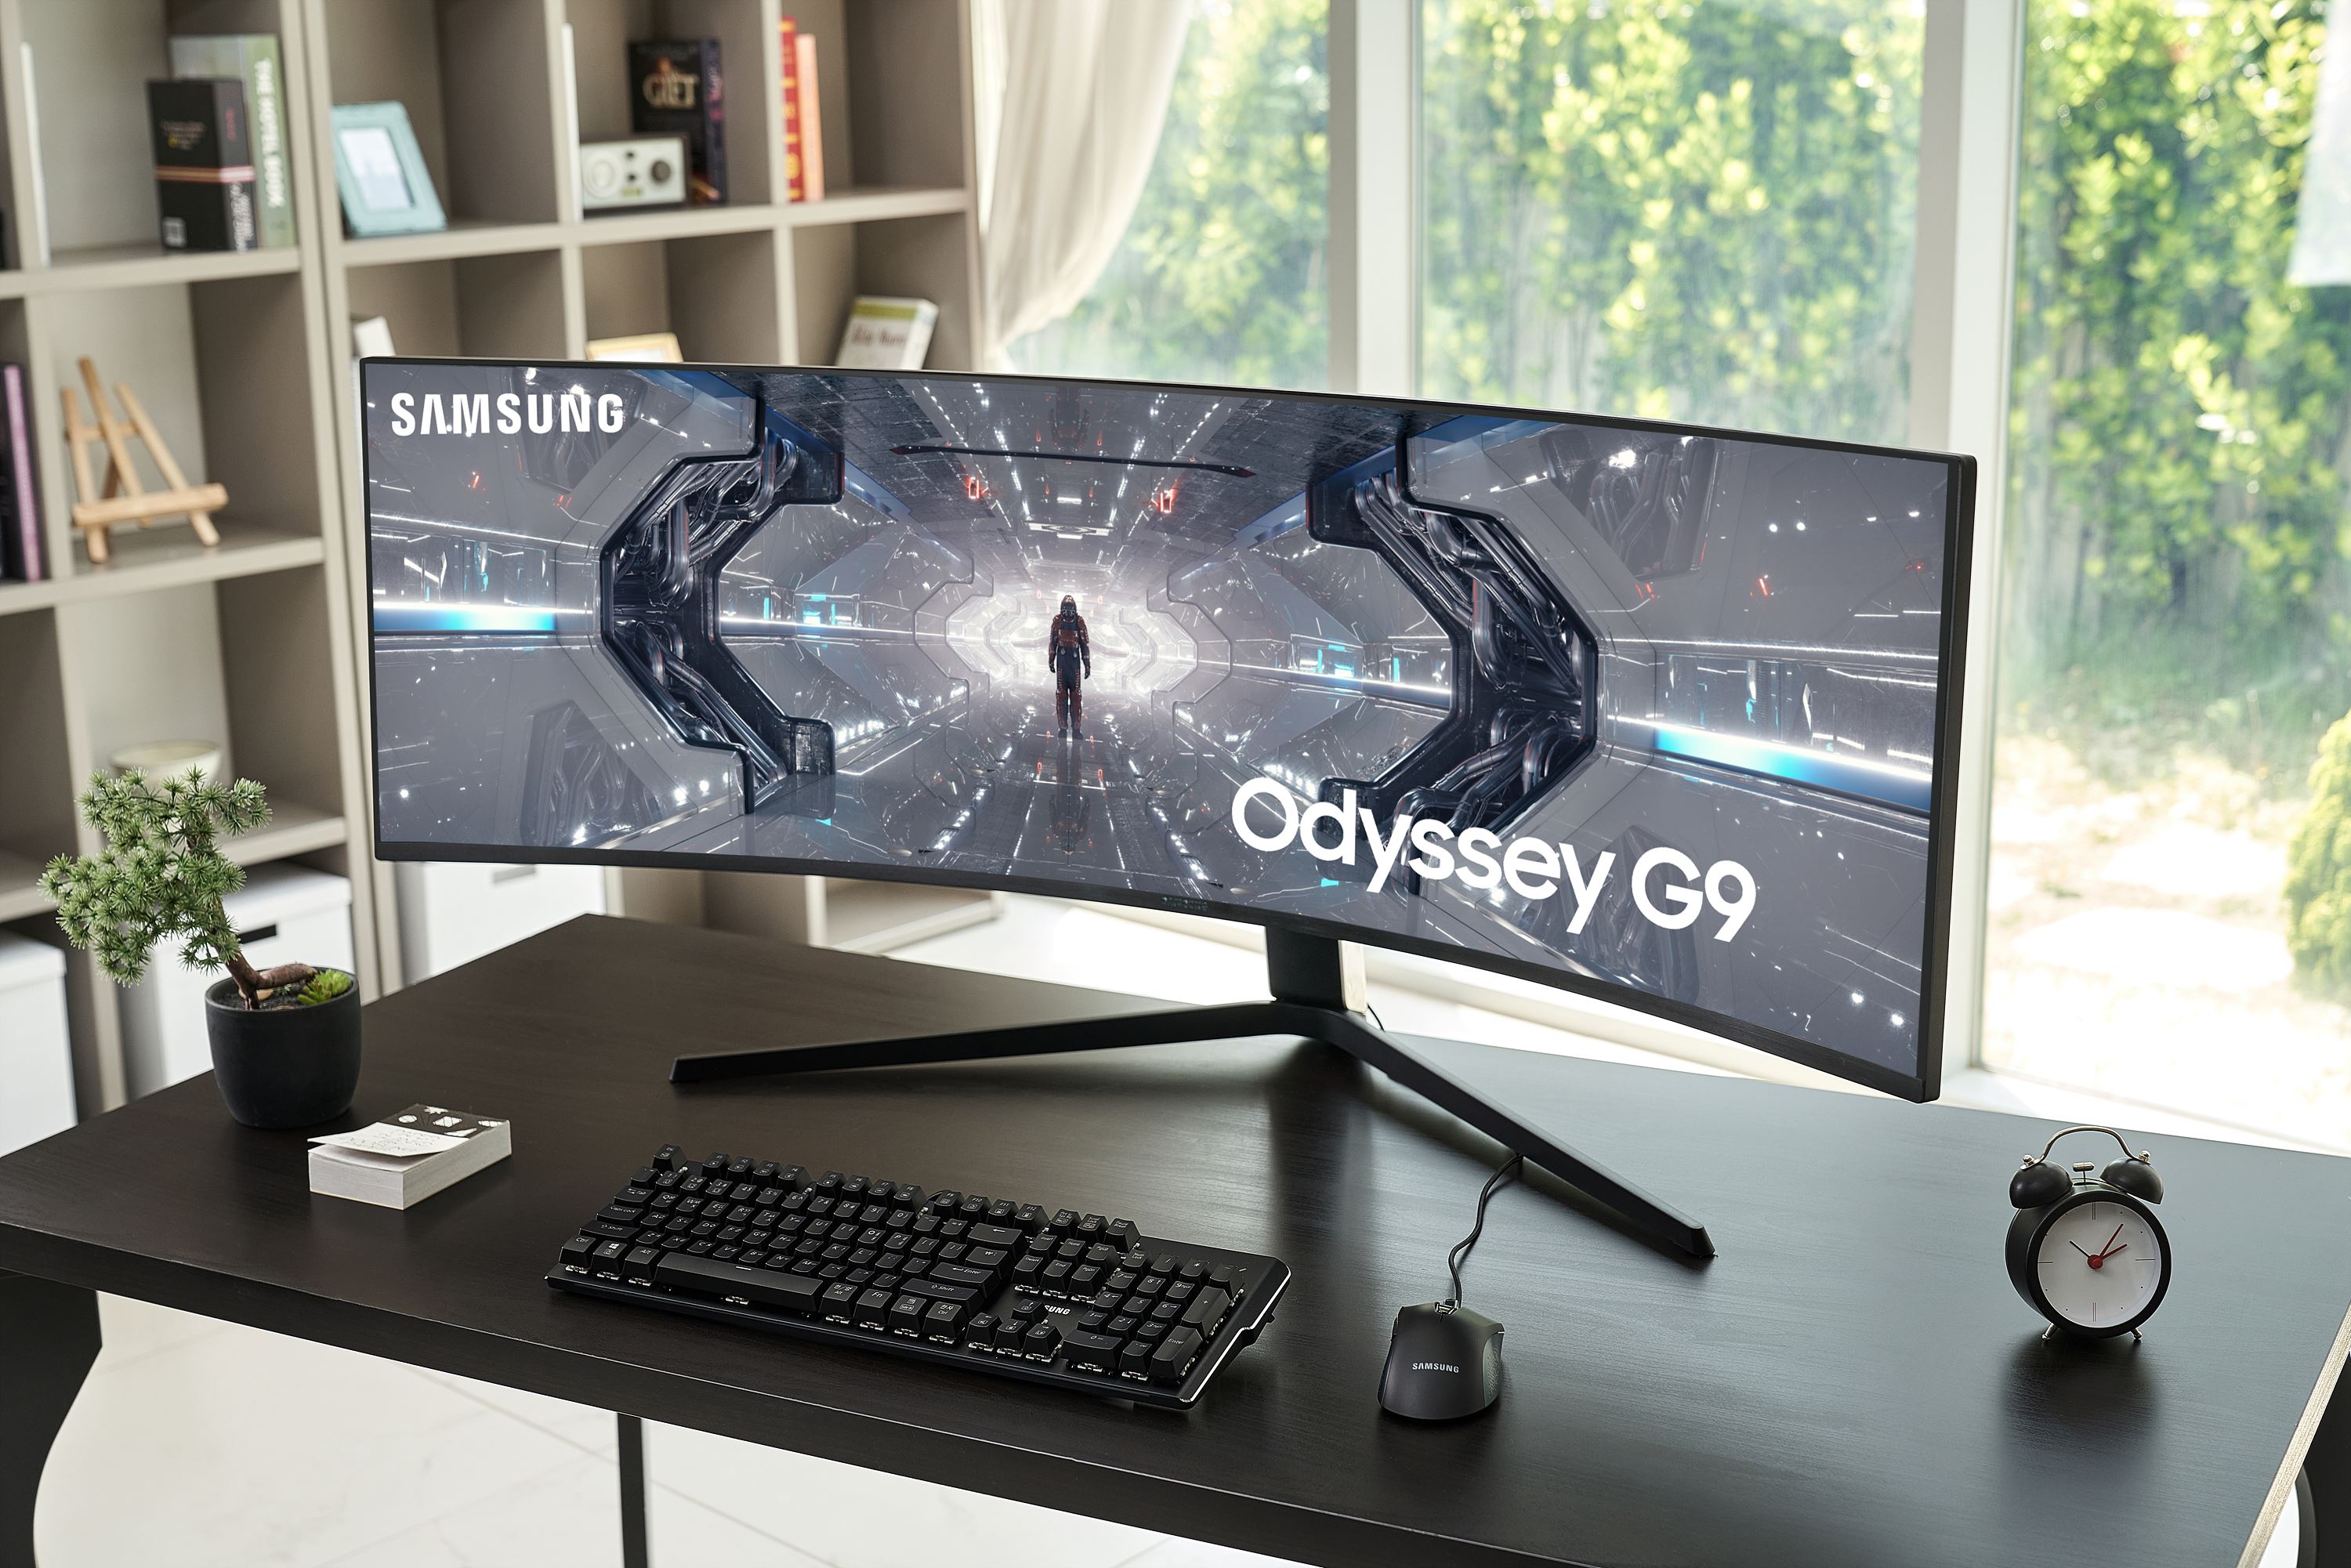 Samsung to update Odyssey G9 gaming monitor with Quantum MiniLED